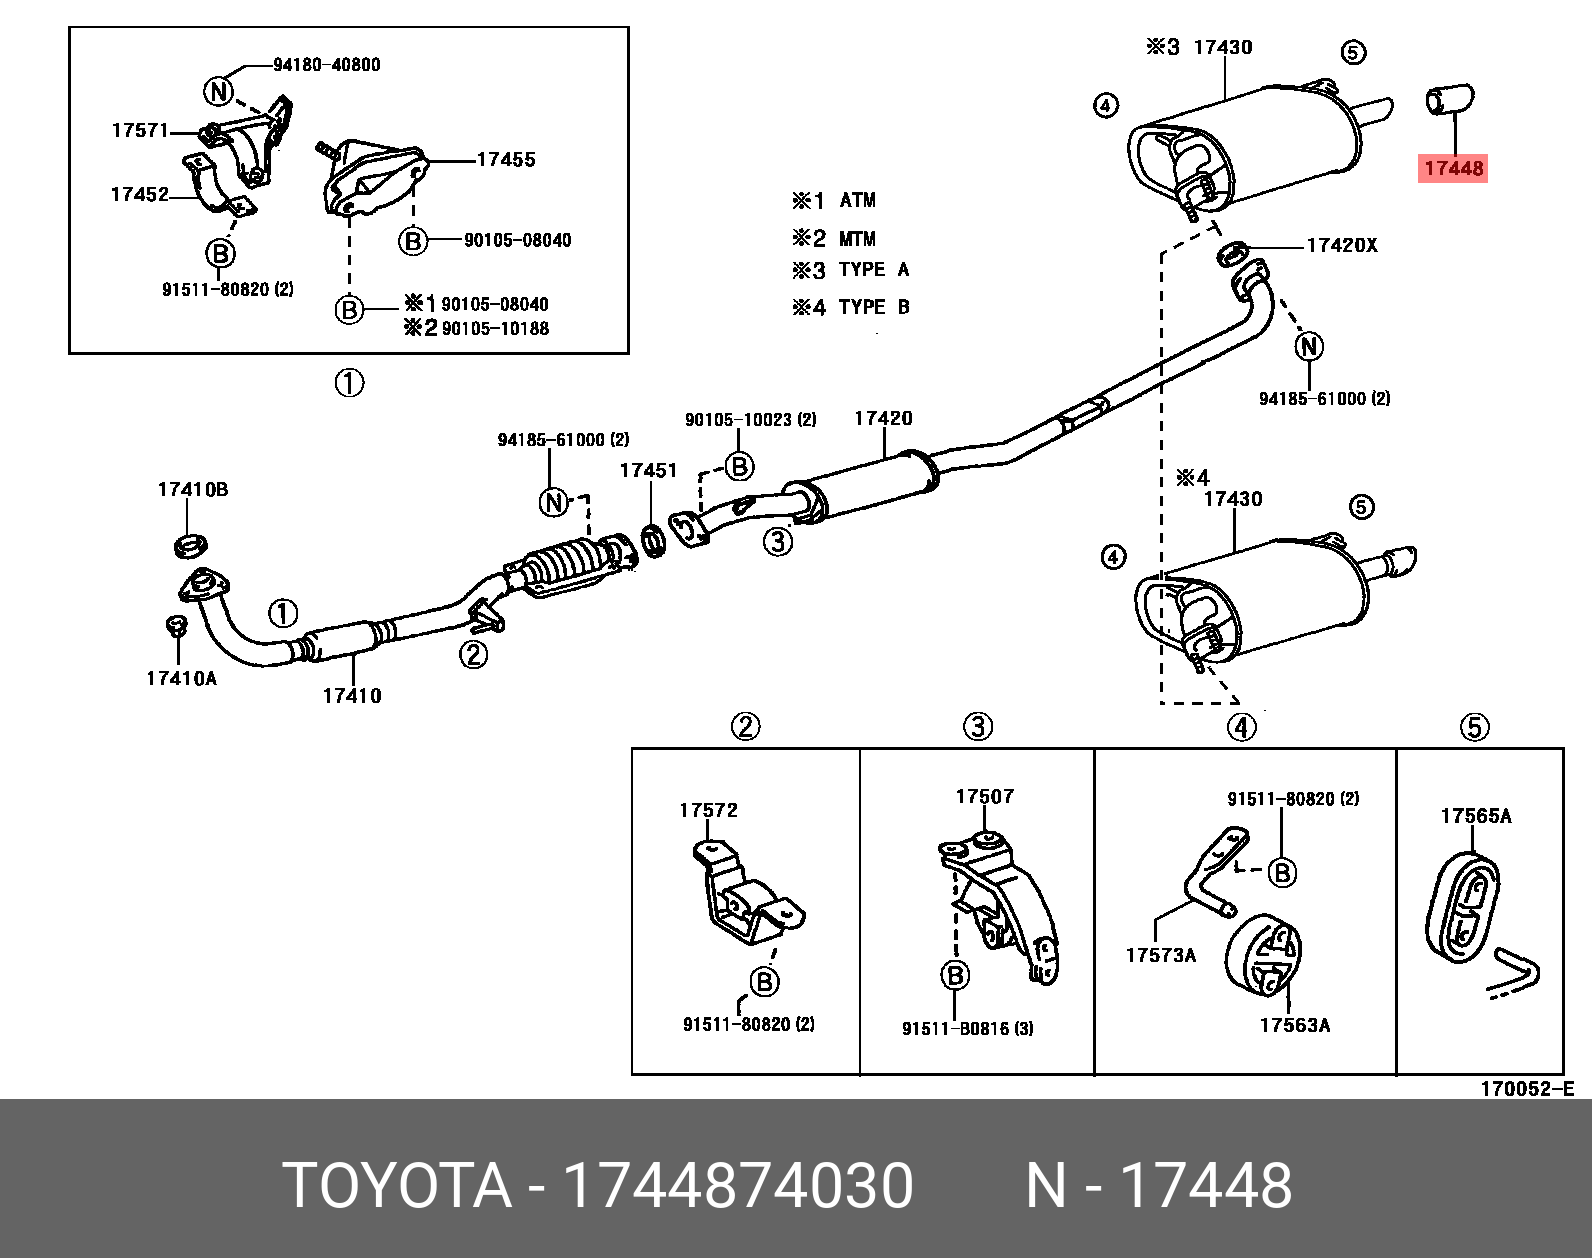 COROLLA LEVIN 198705 - 199106, BAFFLE, TAIL PIPE